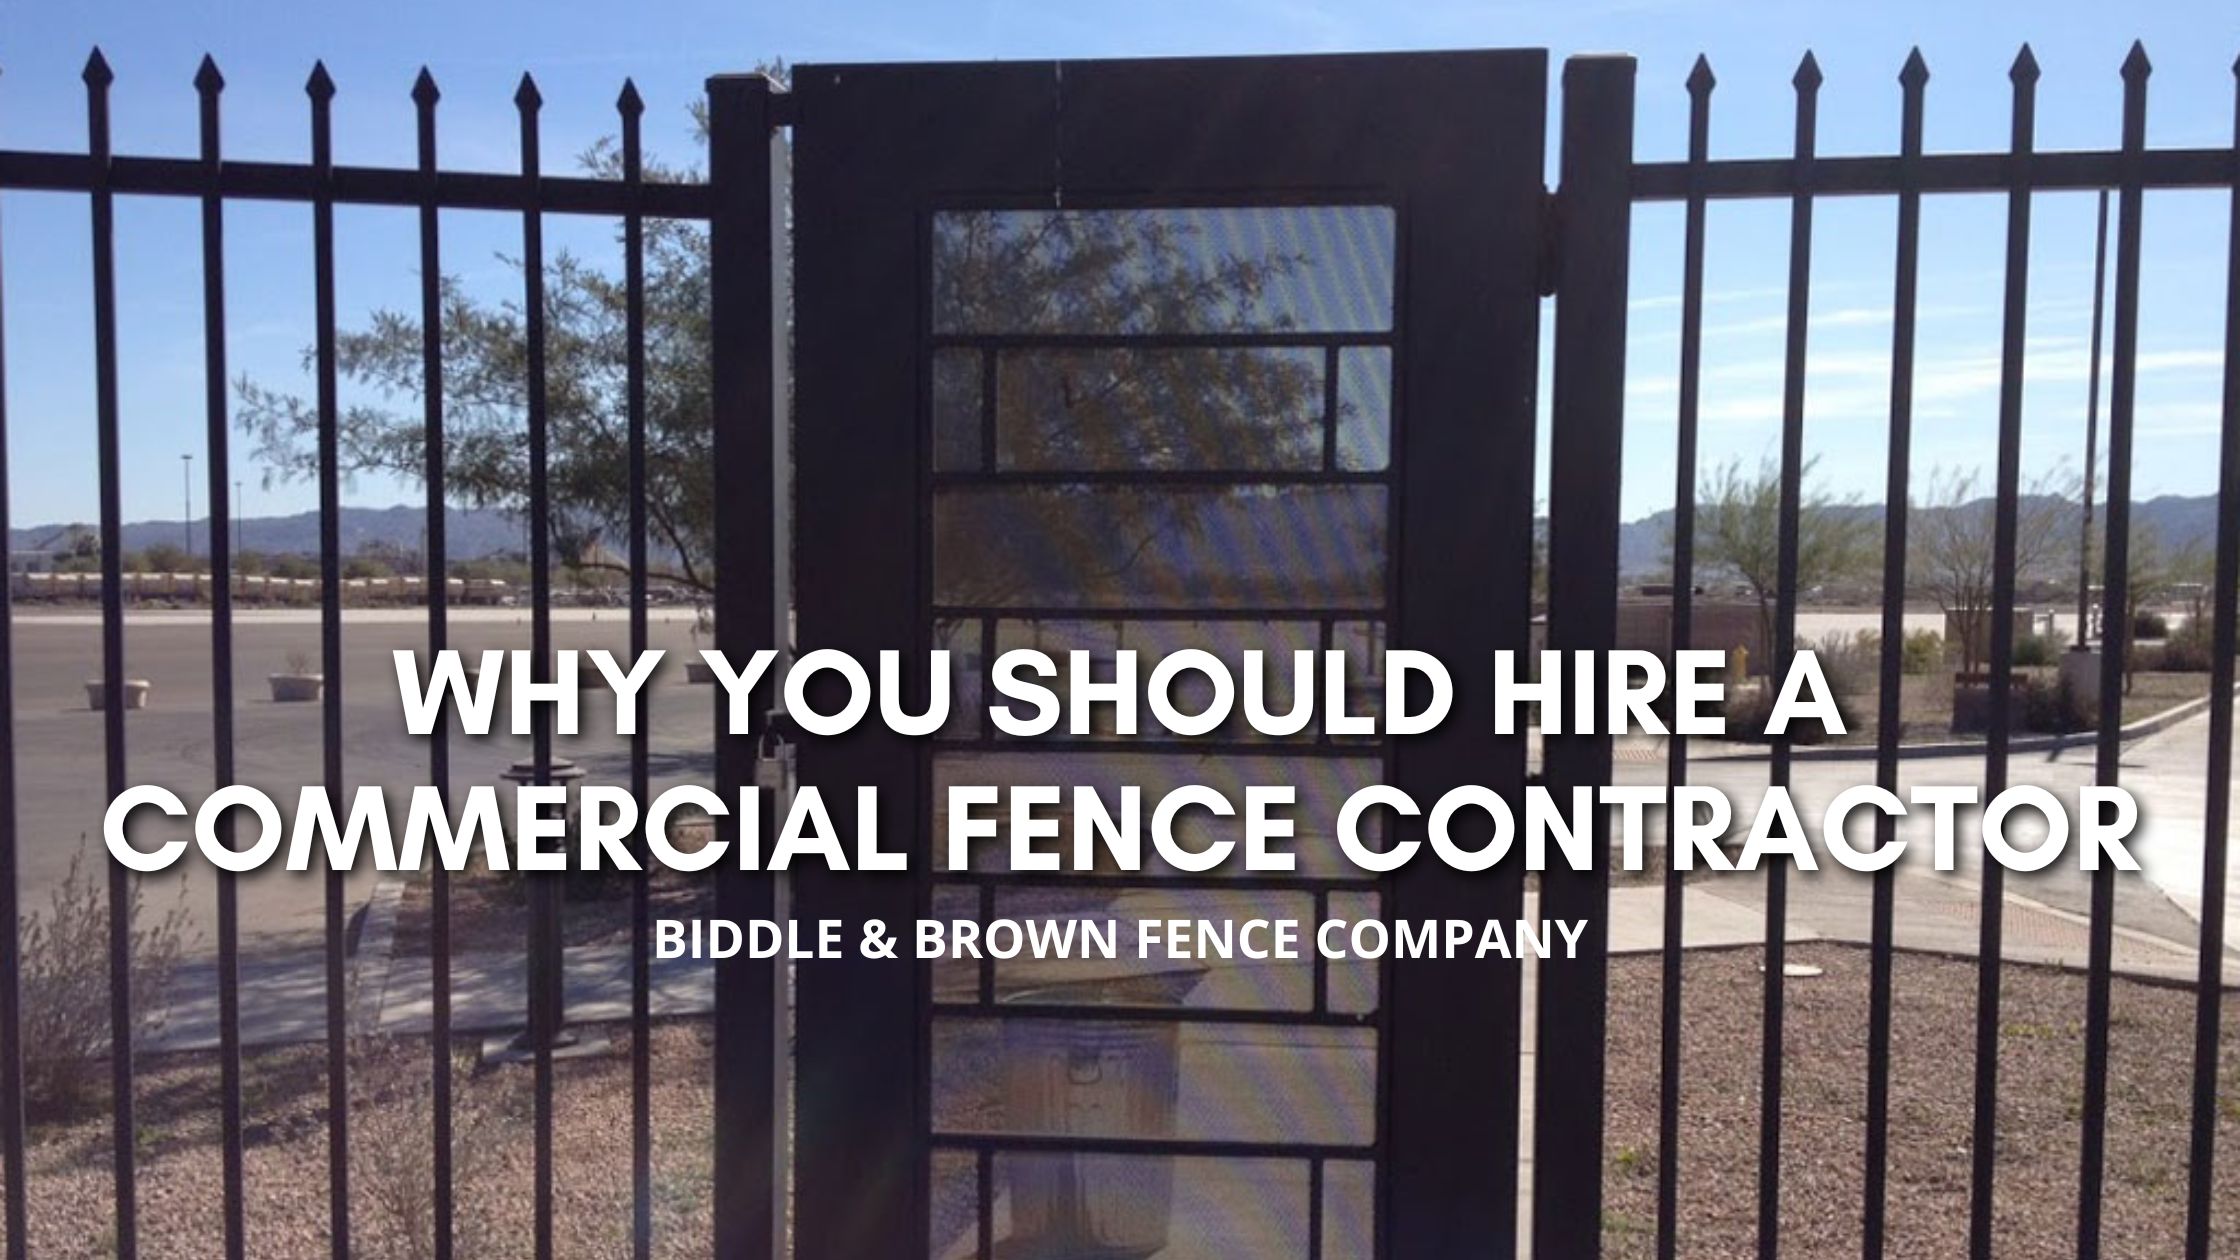 Why You Should Hire a Commercial Fence Contractor